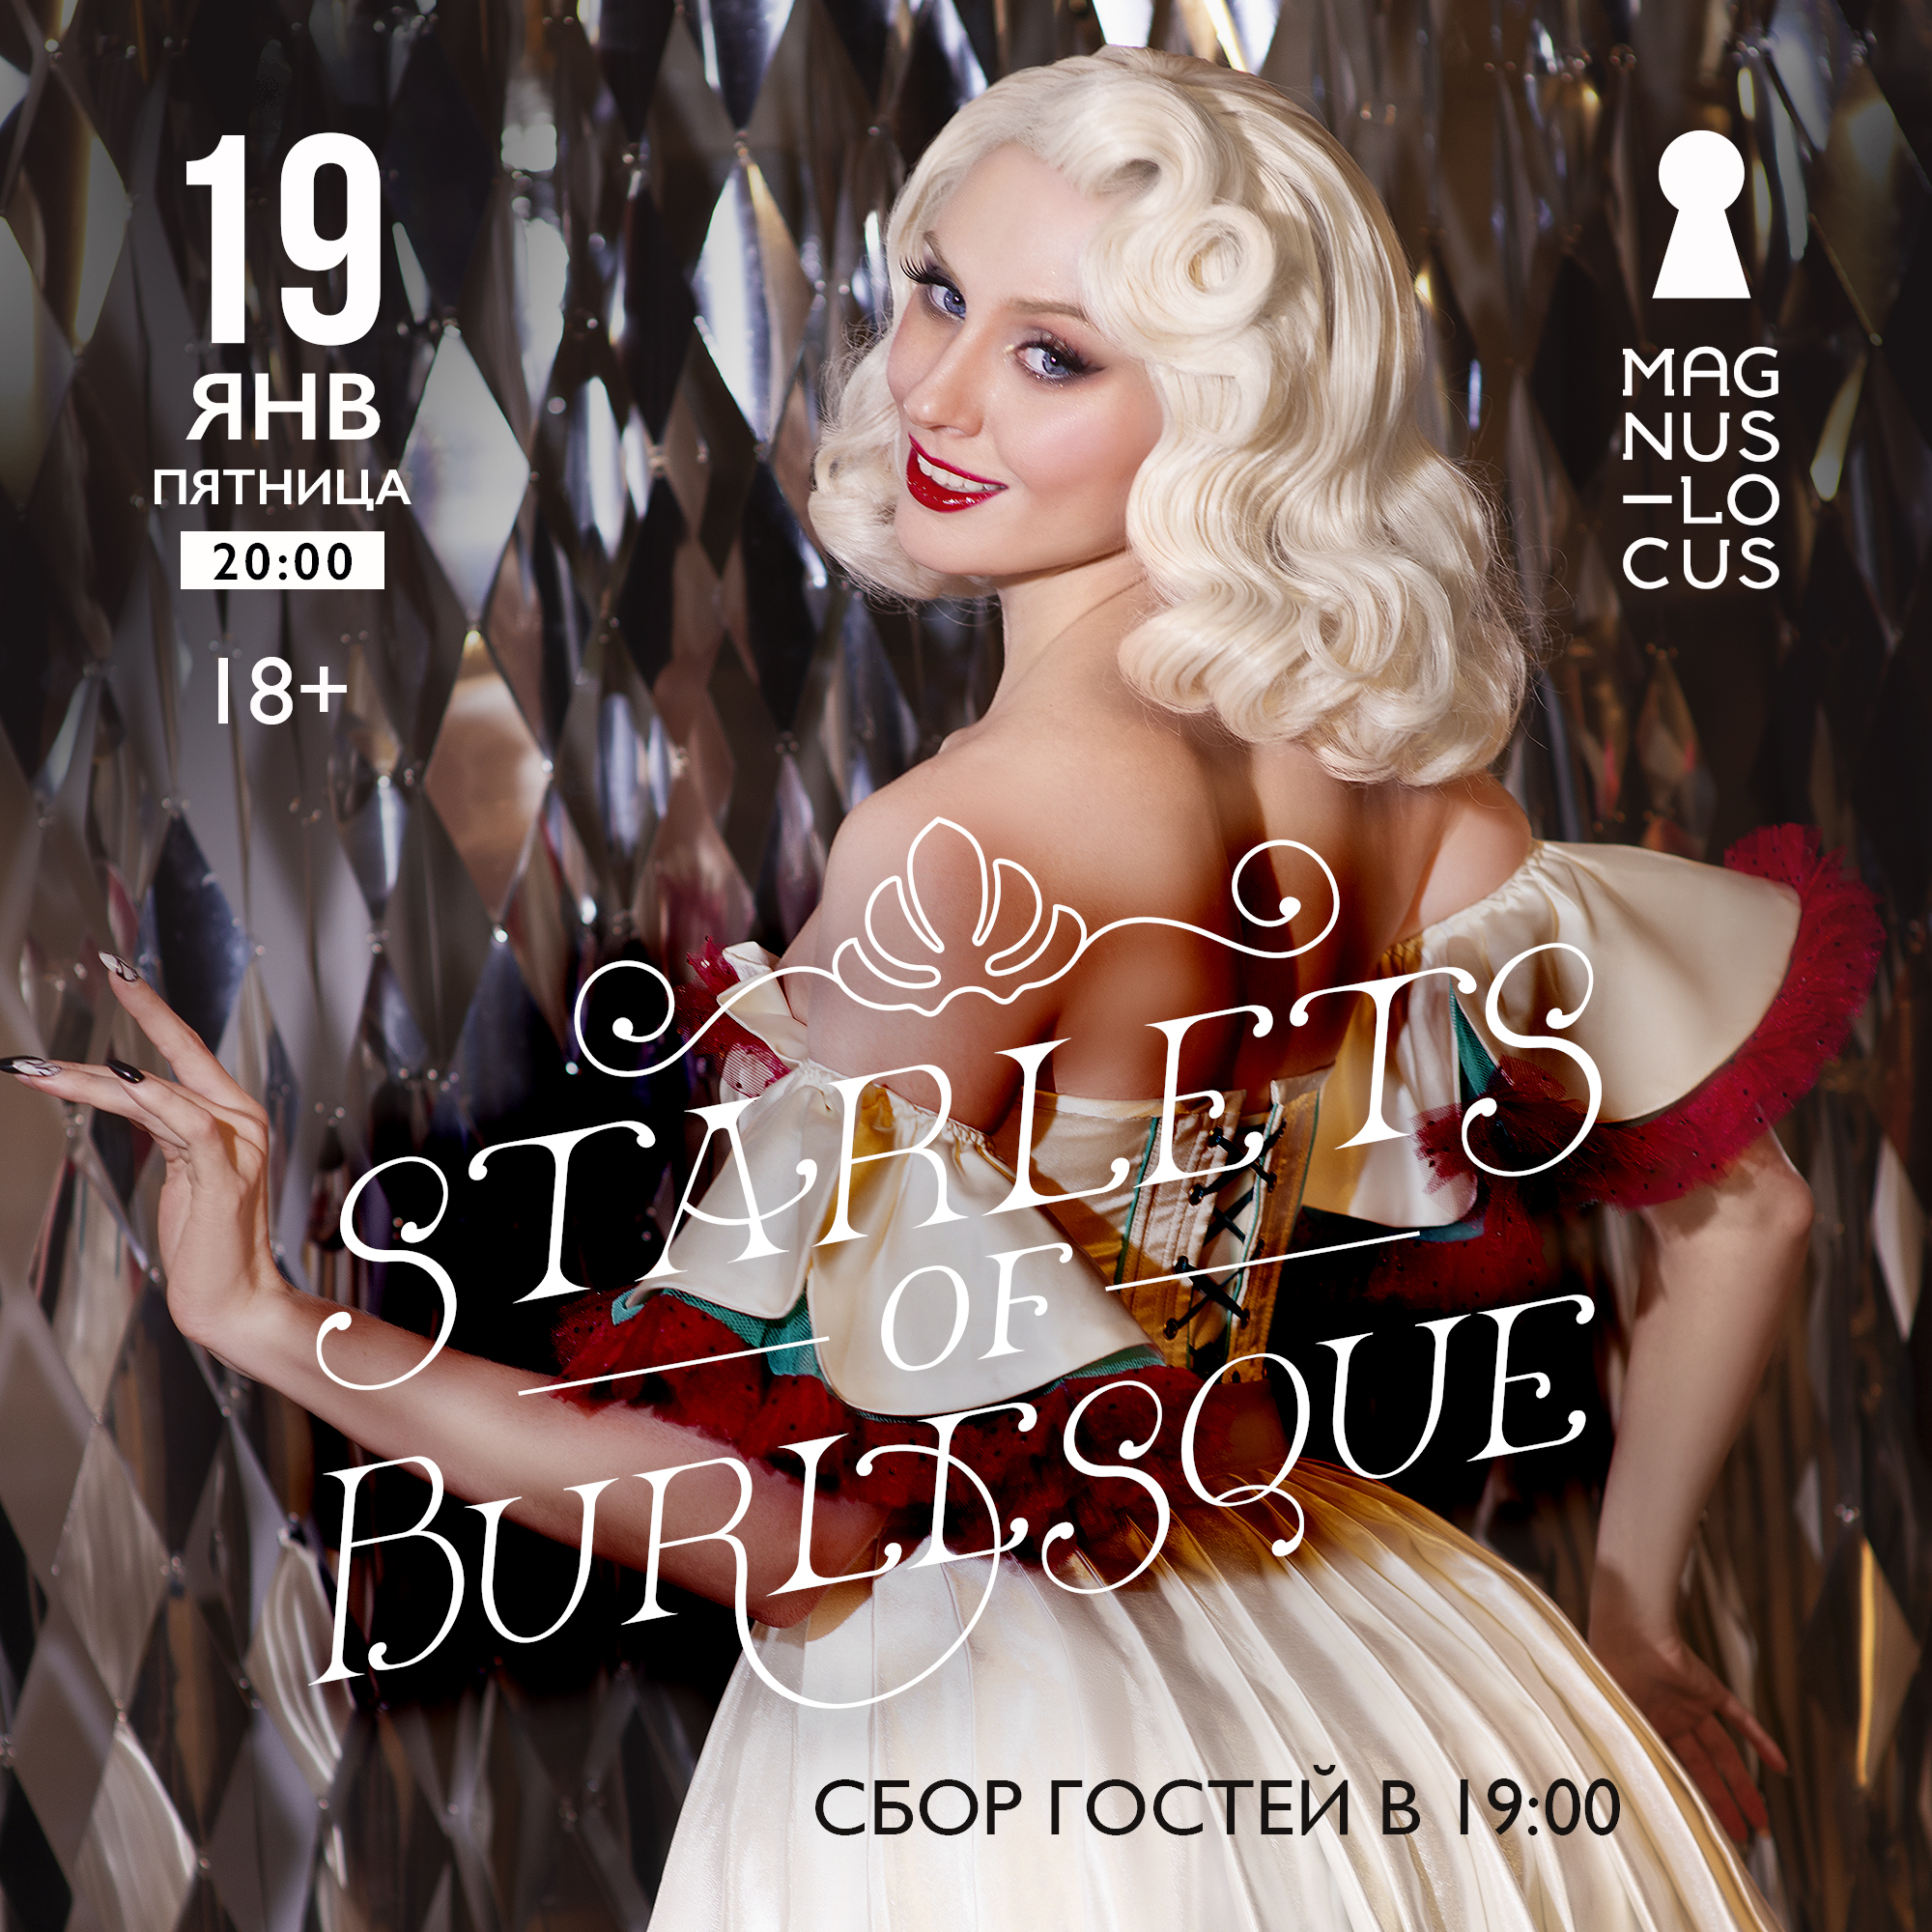 STARLETS OF BURLESQUE